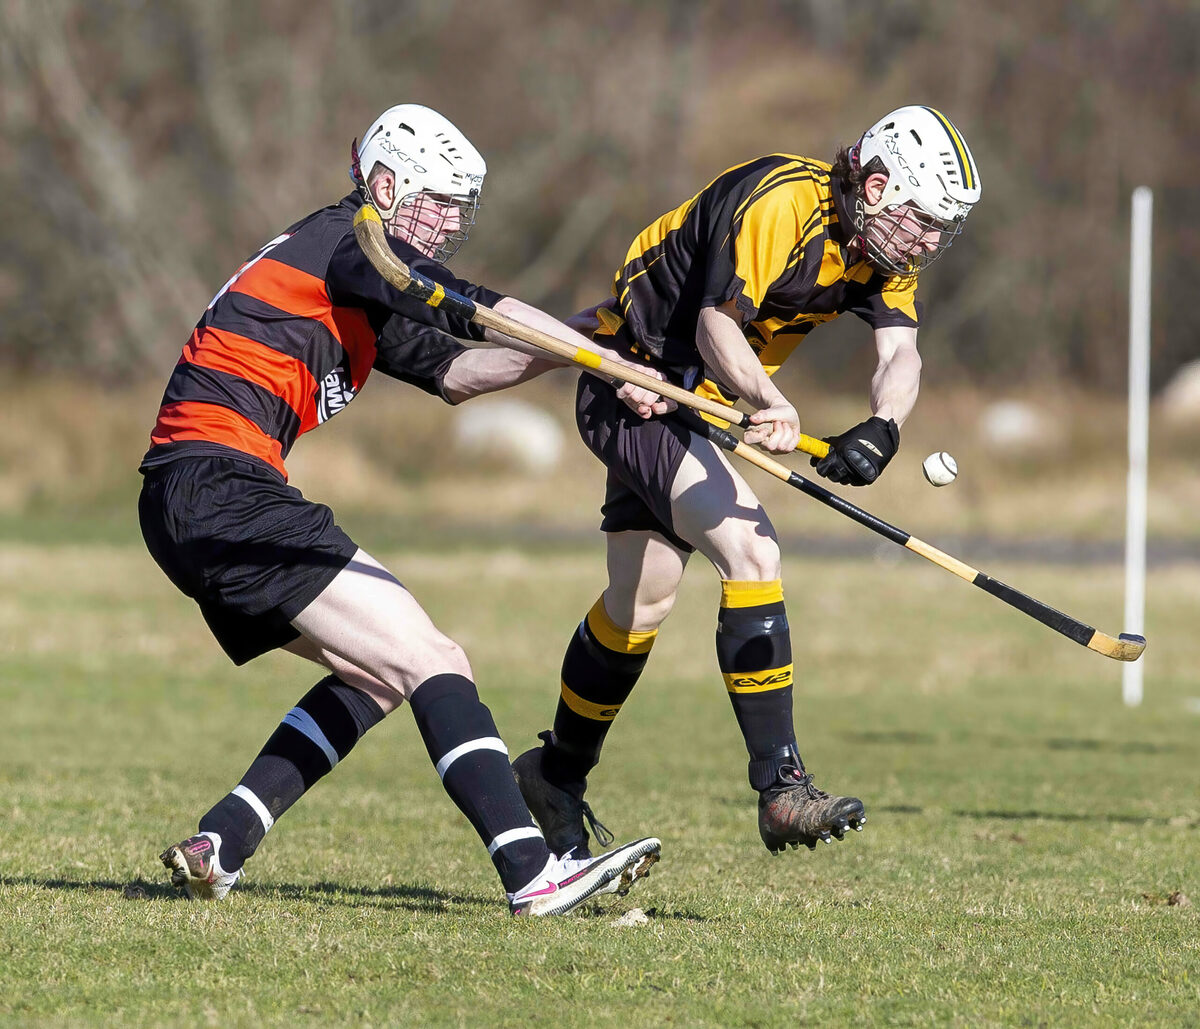 Covid call-offs disrupt shinty fixtures